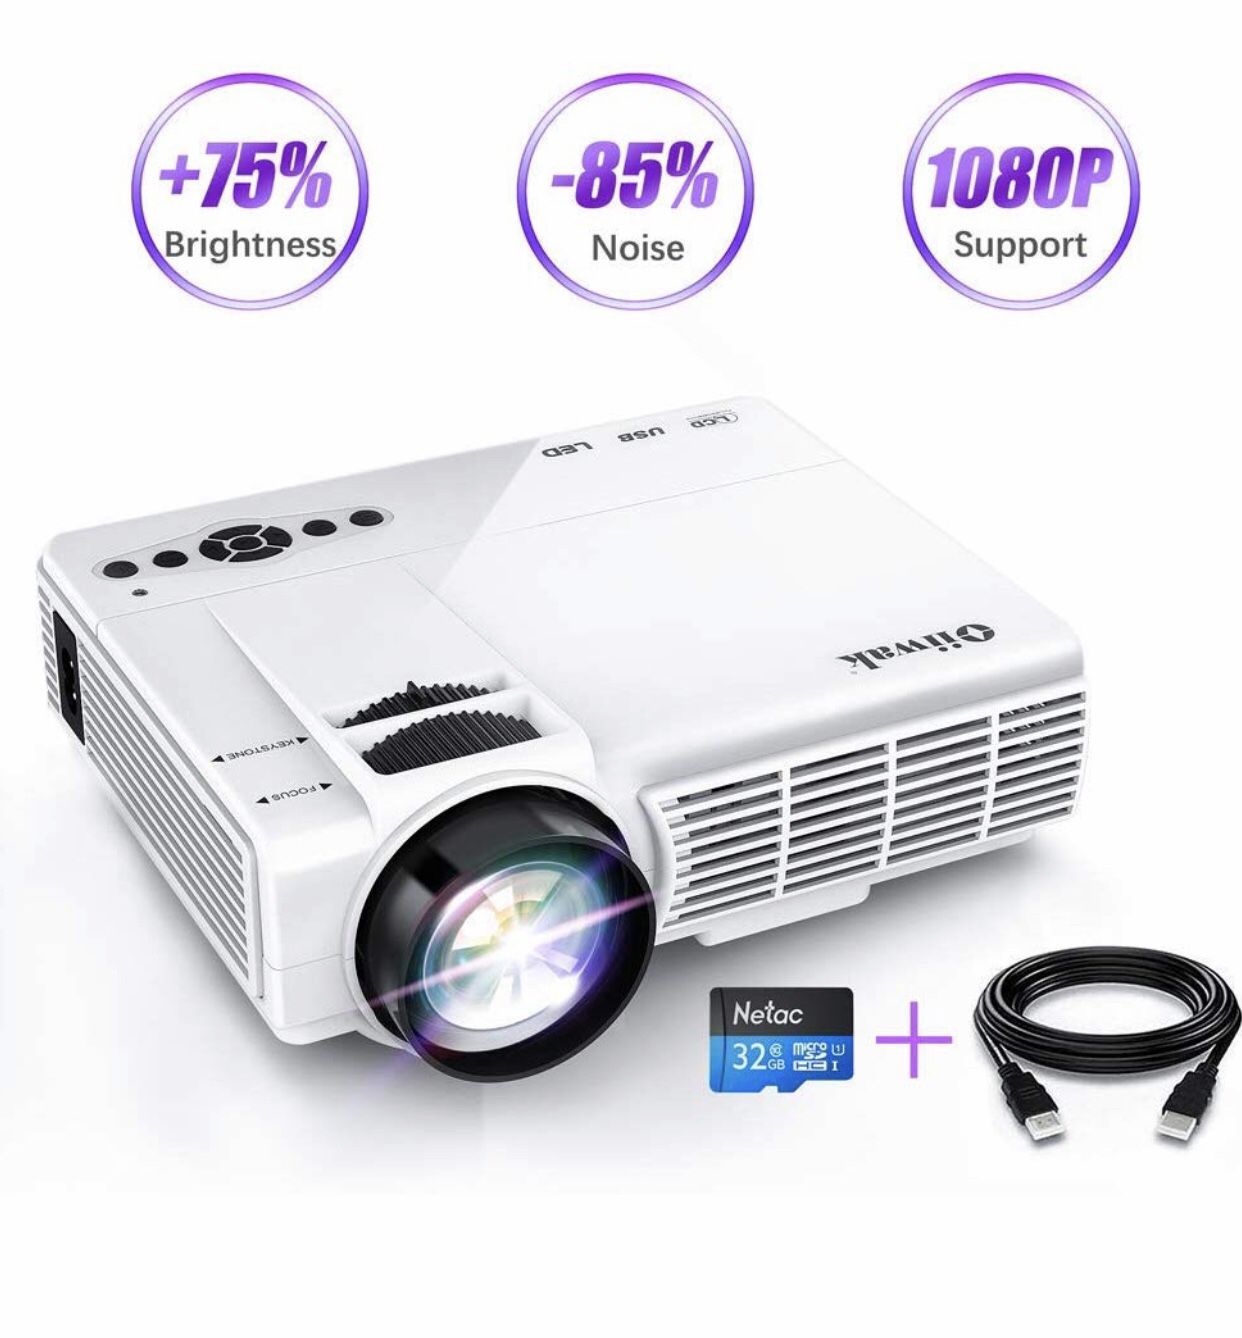 Mini Projector, Full HD 1080P and 170'' Support, Oiiwak 2600 Lumen Portable Movie Projector with +75% Brightness, LED Video Projector, Compatible wit